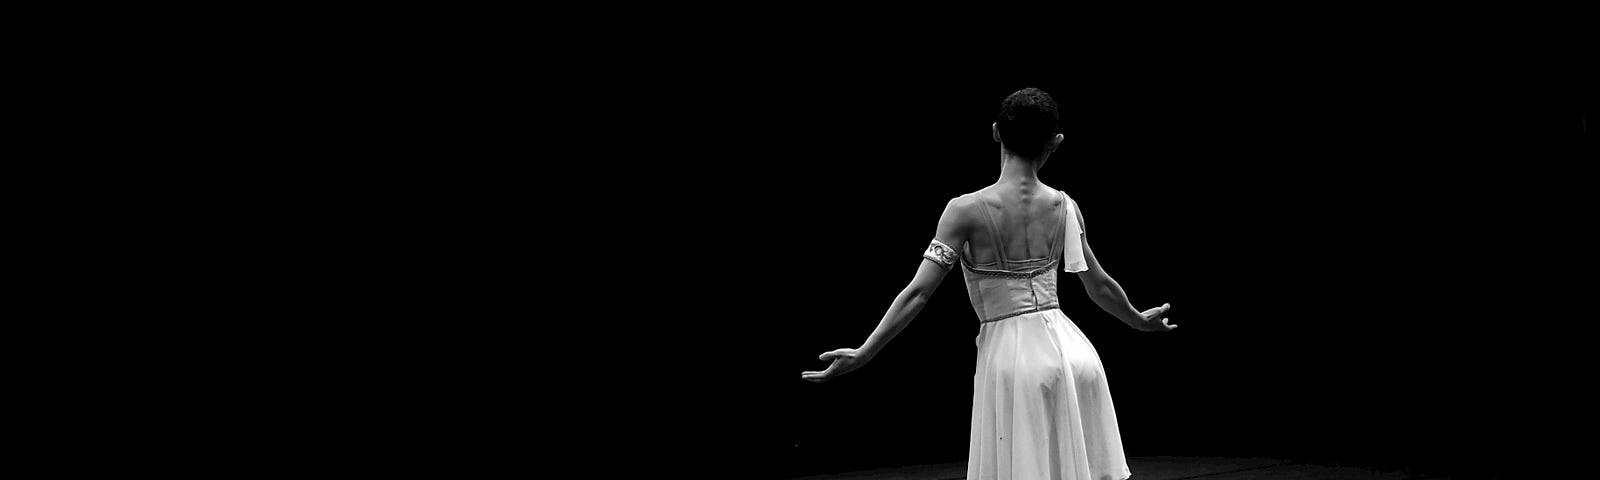 Ballet dancer dancing in black and white photo